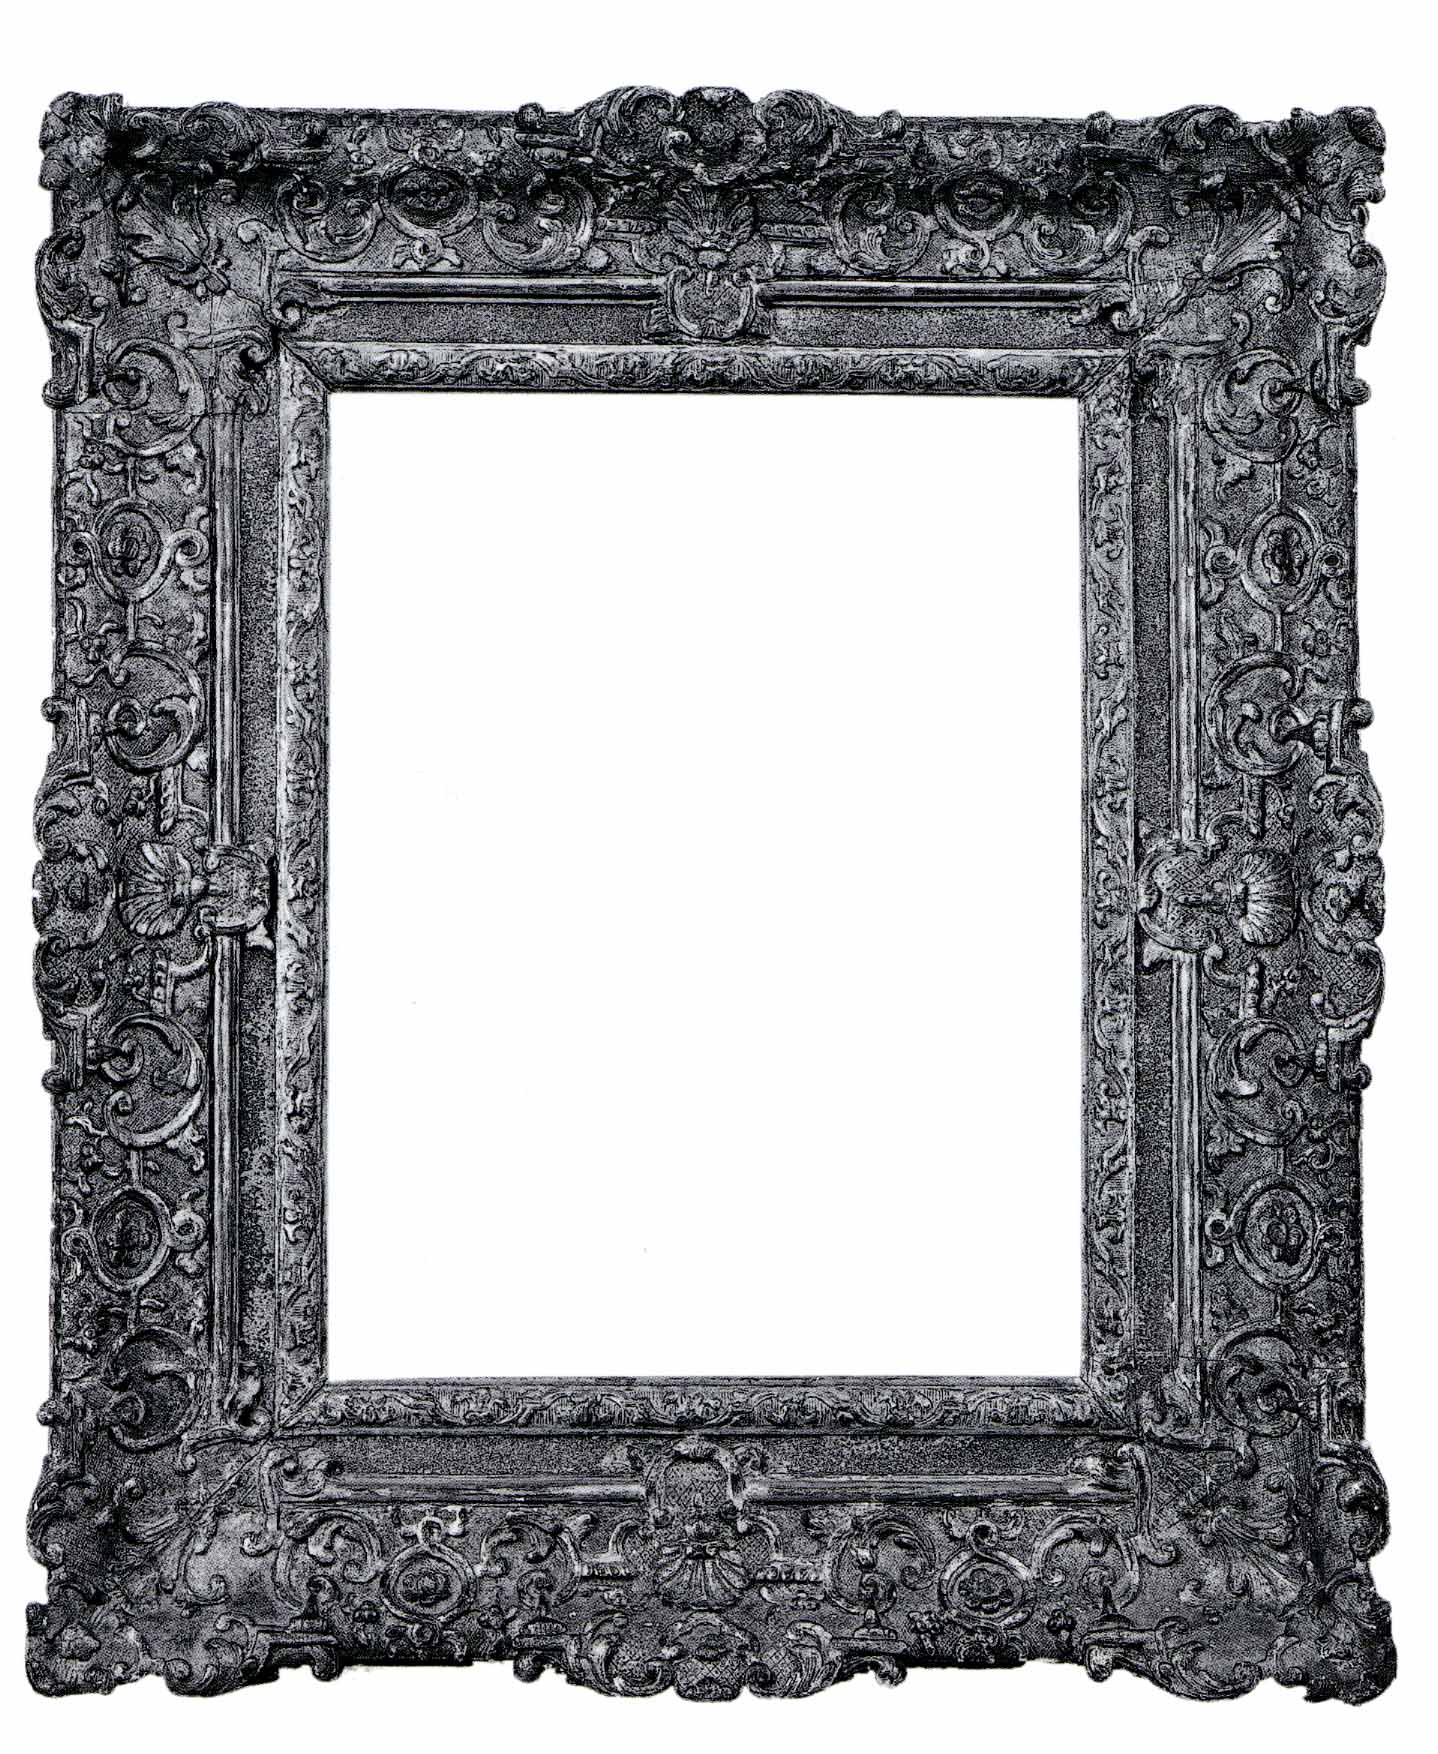 Ogee frame | French | The Metropolitan Museum of Art